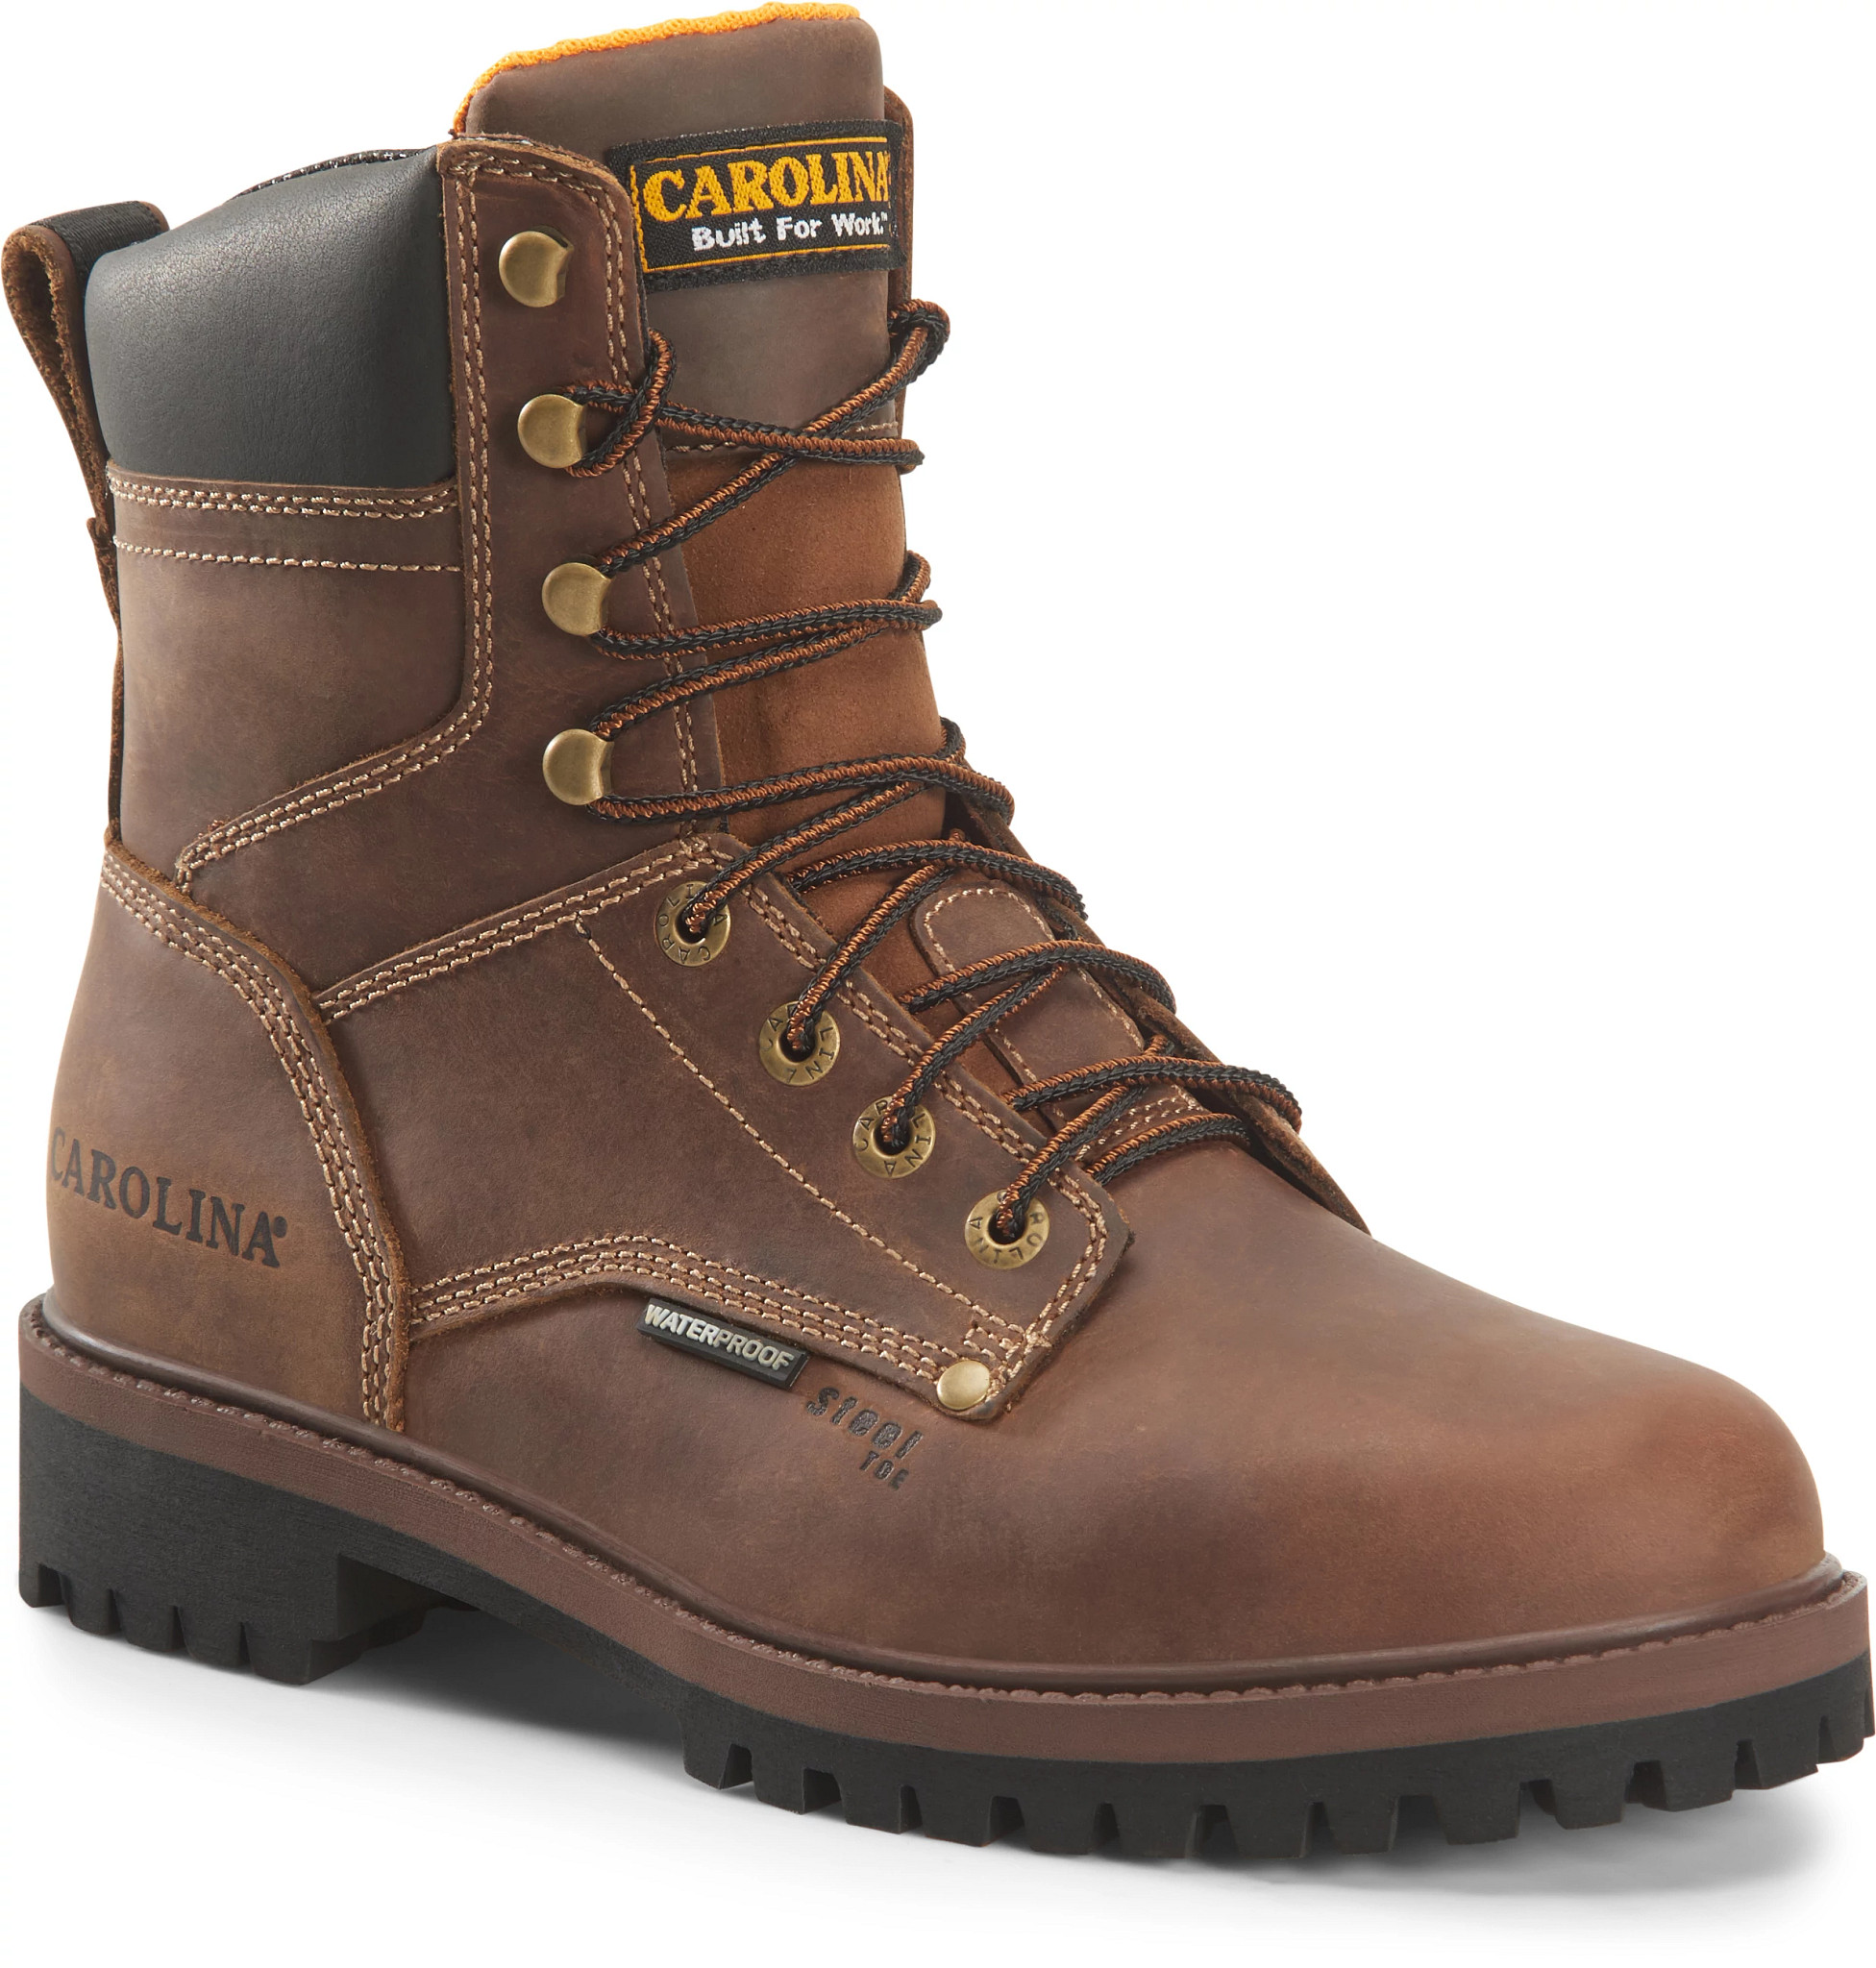 Shop All Men's work footwear, apparel, and accessories at Carolina